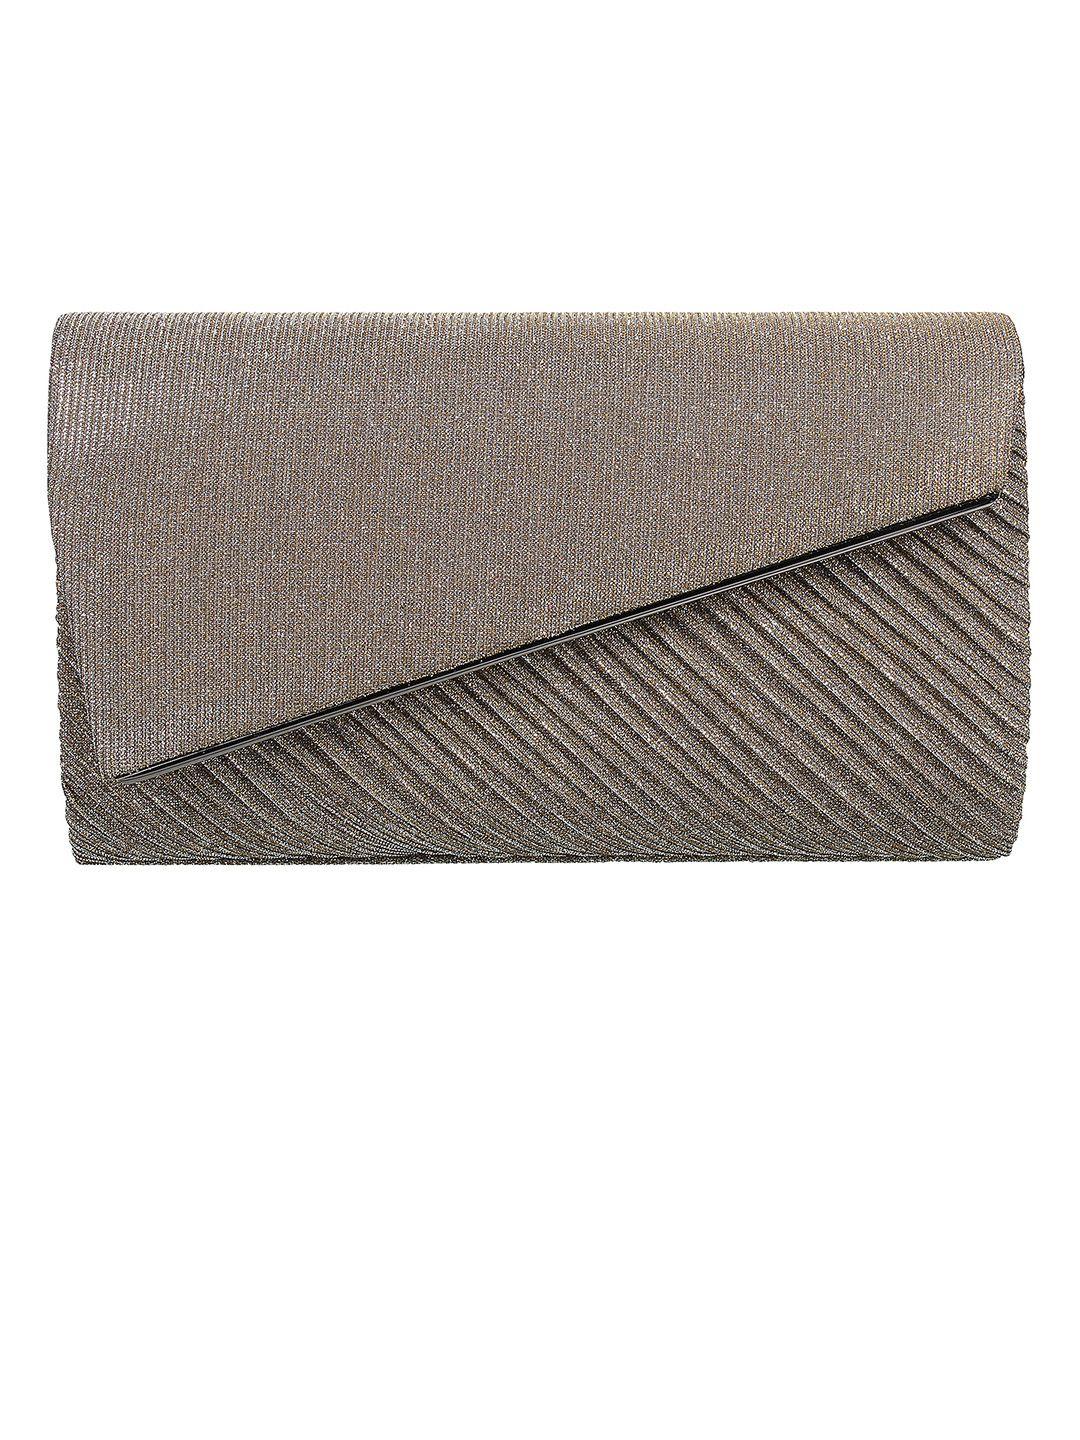 metro gold-toned textured foldover clutch